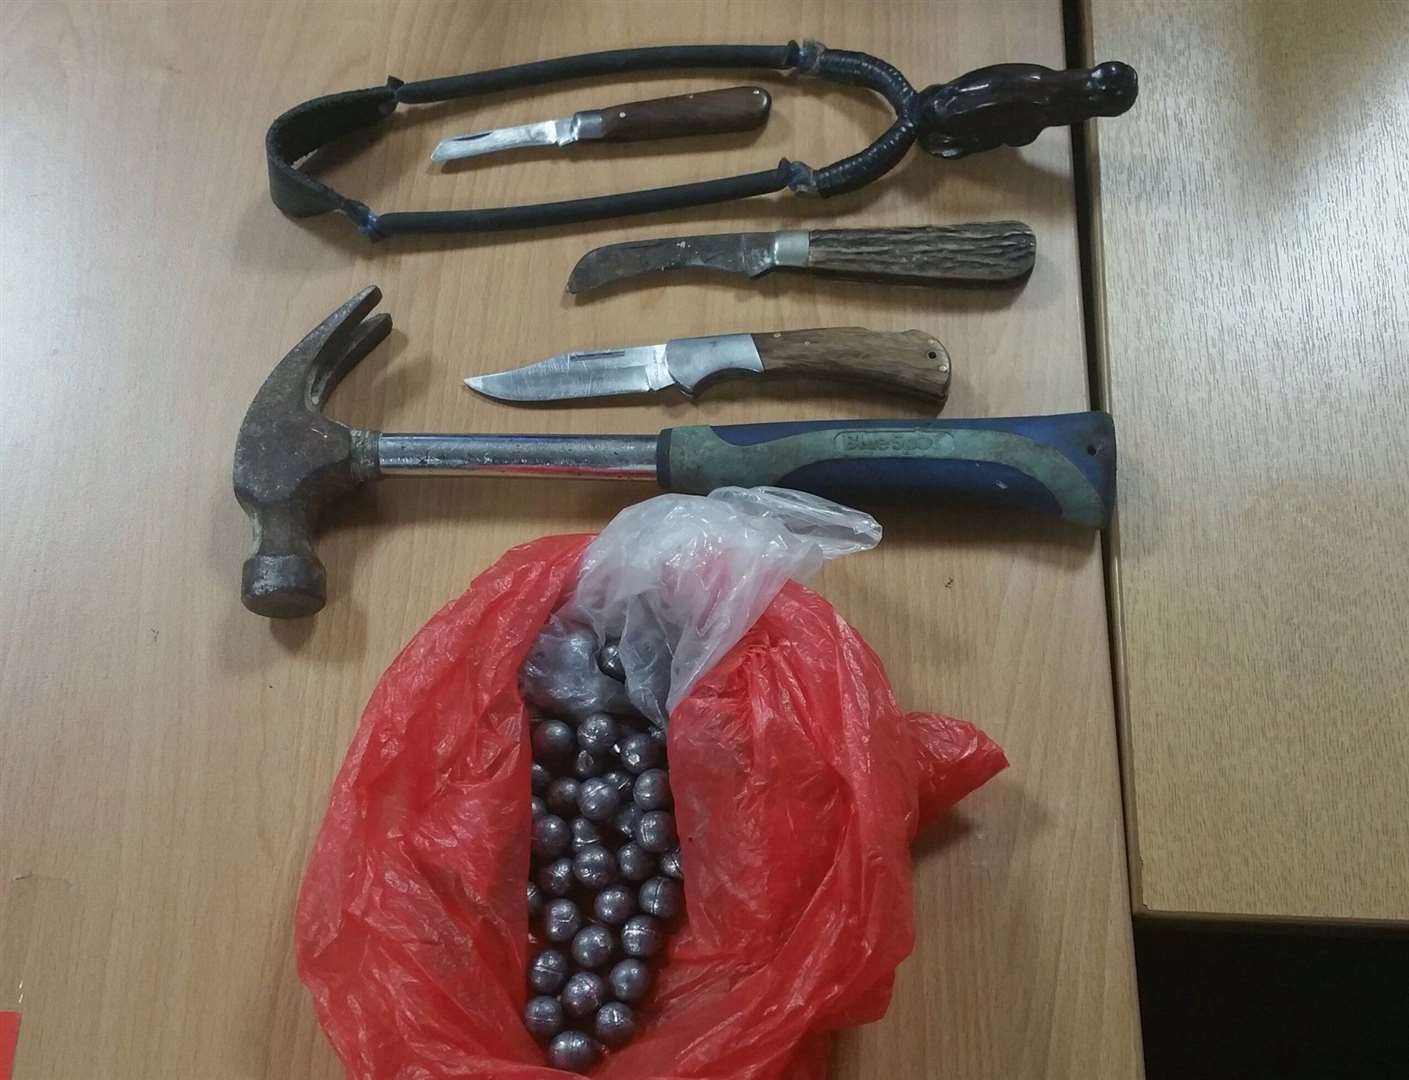 Kent Police seized a number of offensive weapons (22301127)